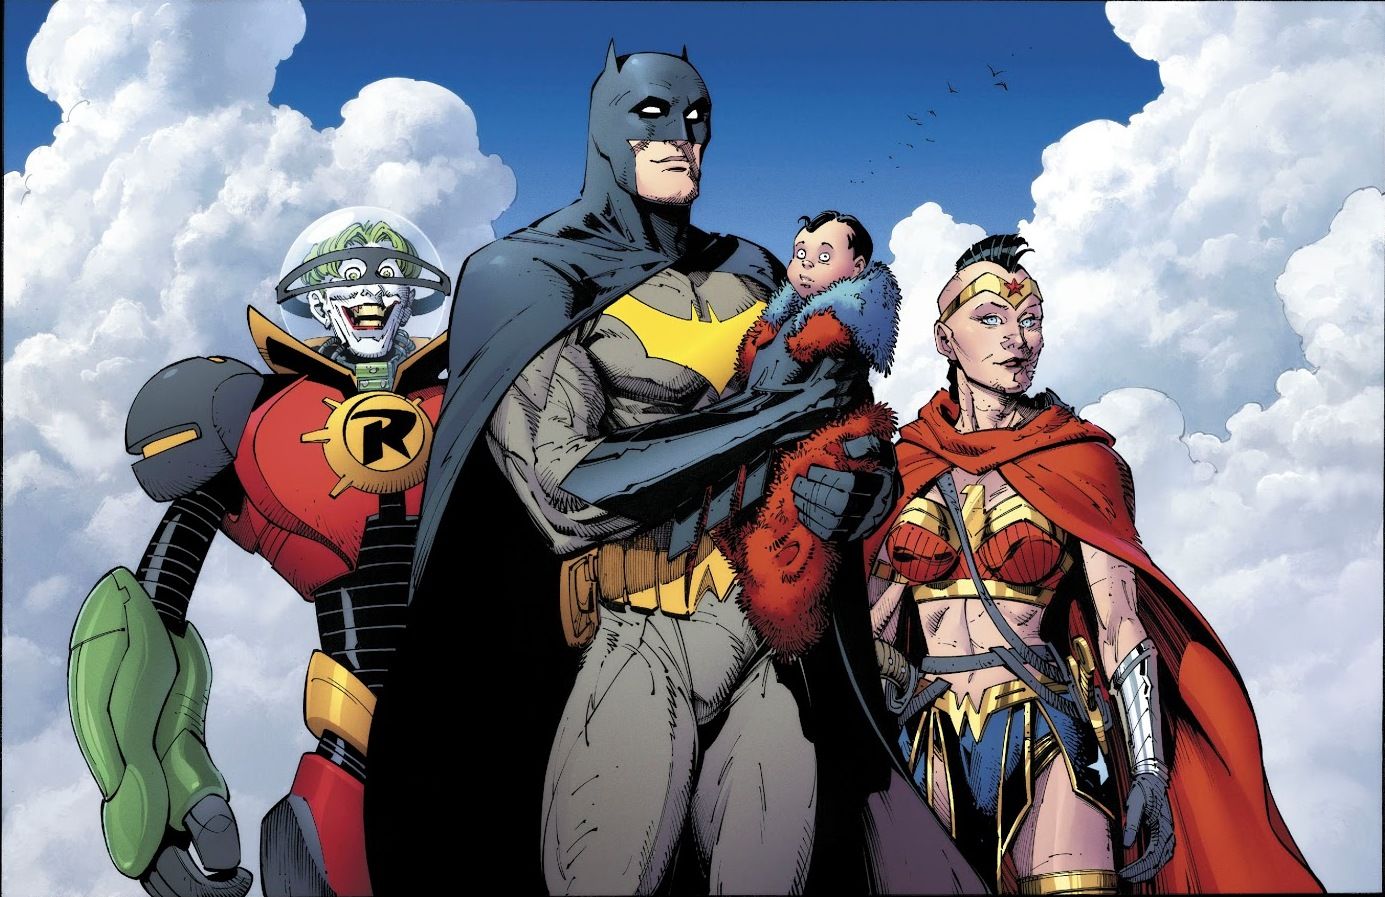 In this happy ending, we get to see a new Justice League come together. Photo: DC Comics